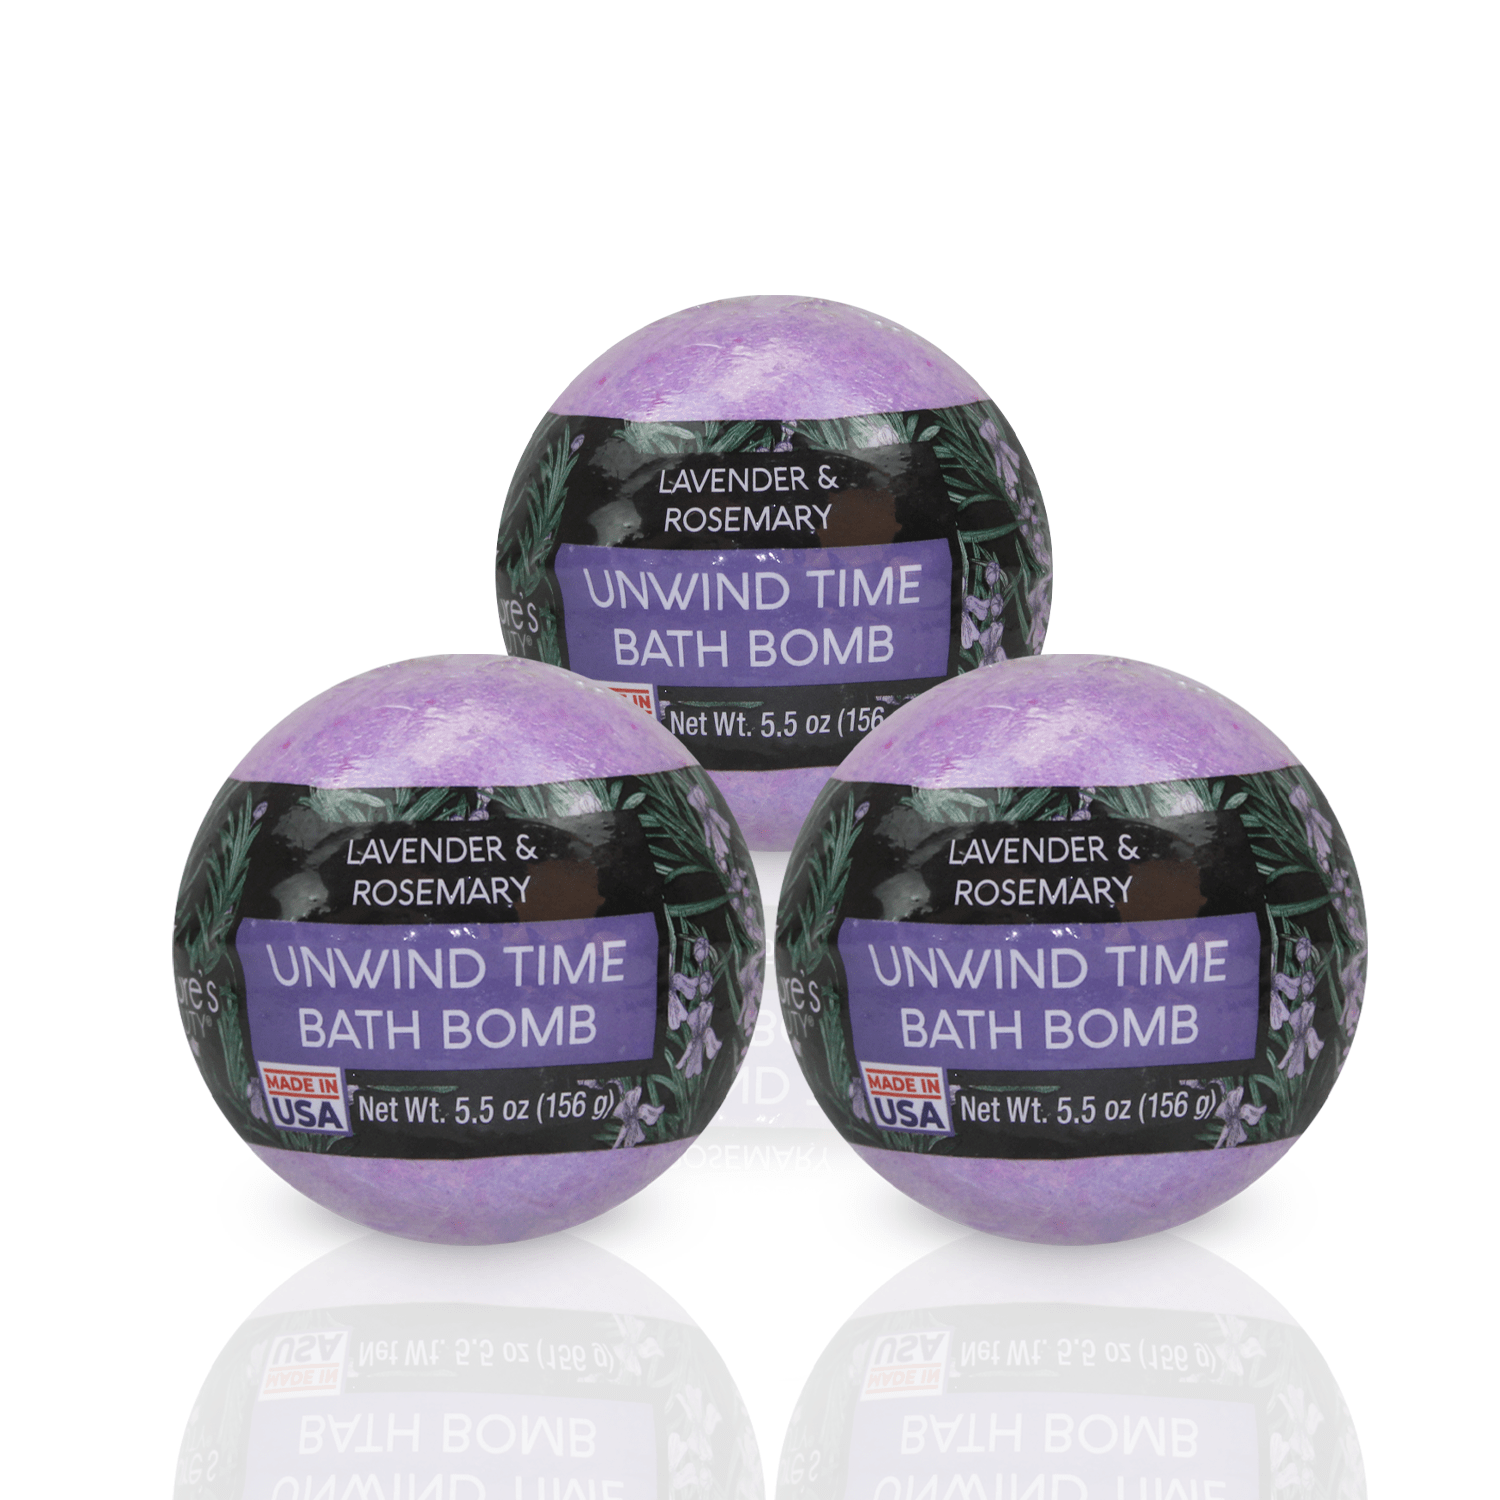 Lavender & Rosemary Nature's Beauty Body Care Buy 2 Get 1 Free 